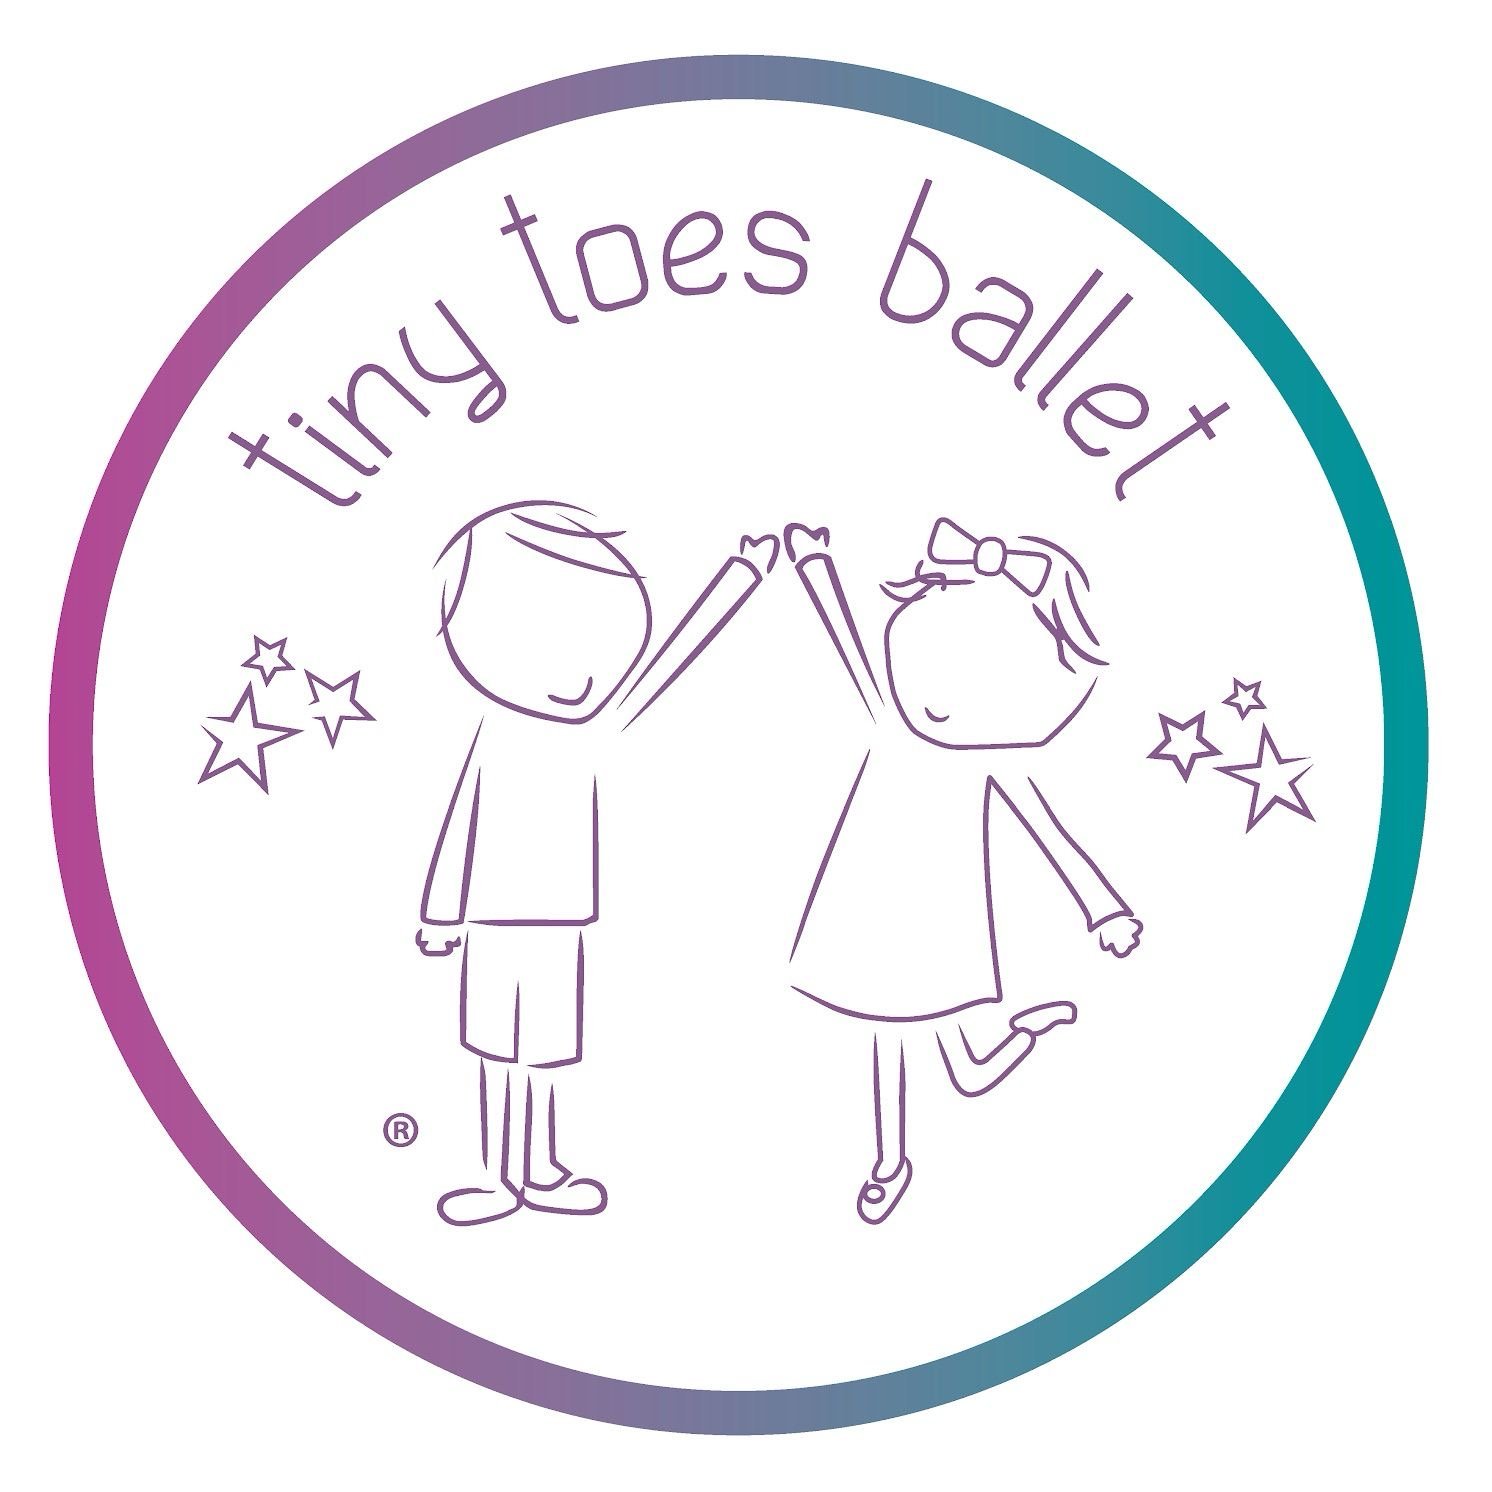 Tiny Toes Ballet Classes - Talbot Green Community Centre